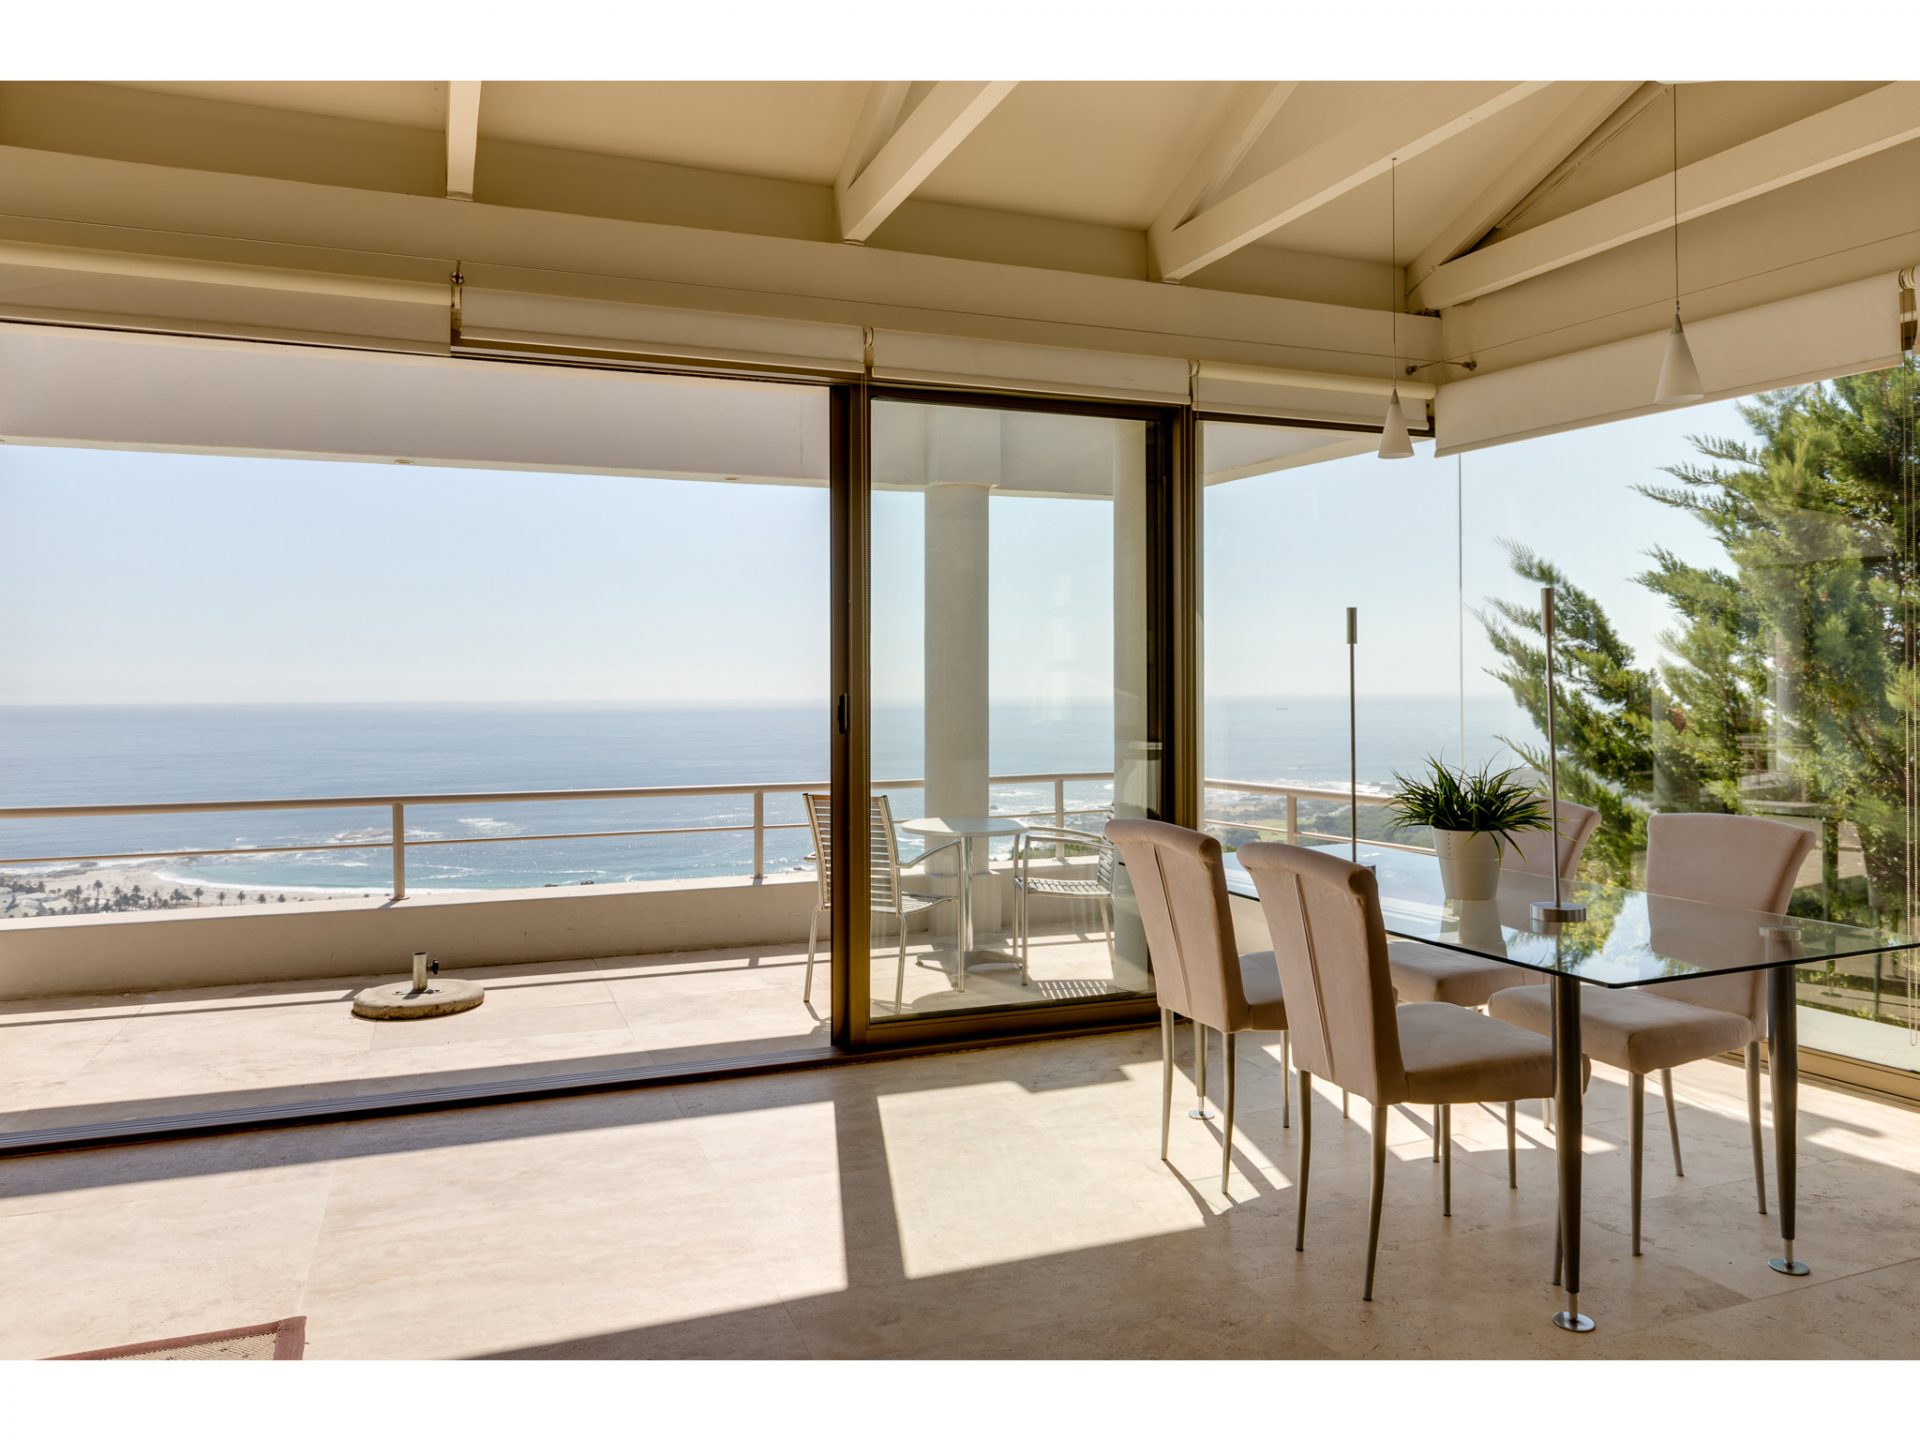 Photo 16 of Geneva Sunsets accommodation in Camps Bay, Cape Town with 6 bedrooms and 7 bathrooms